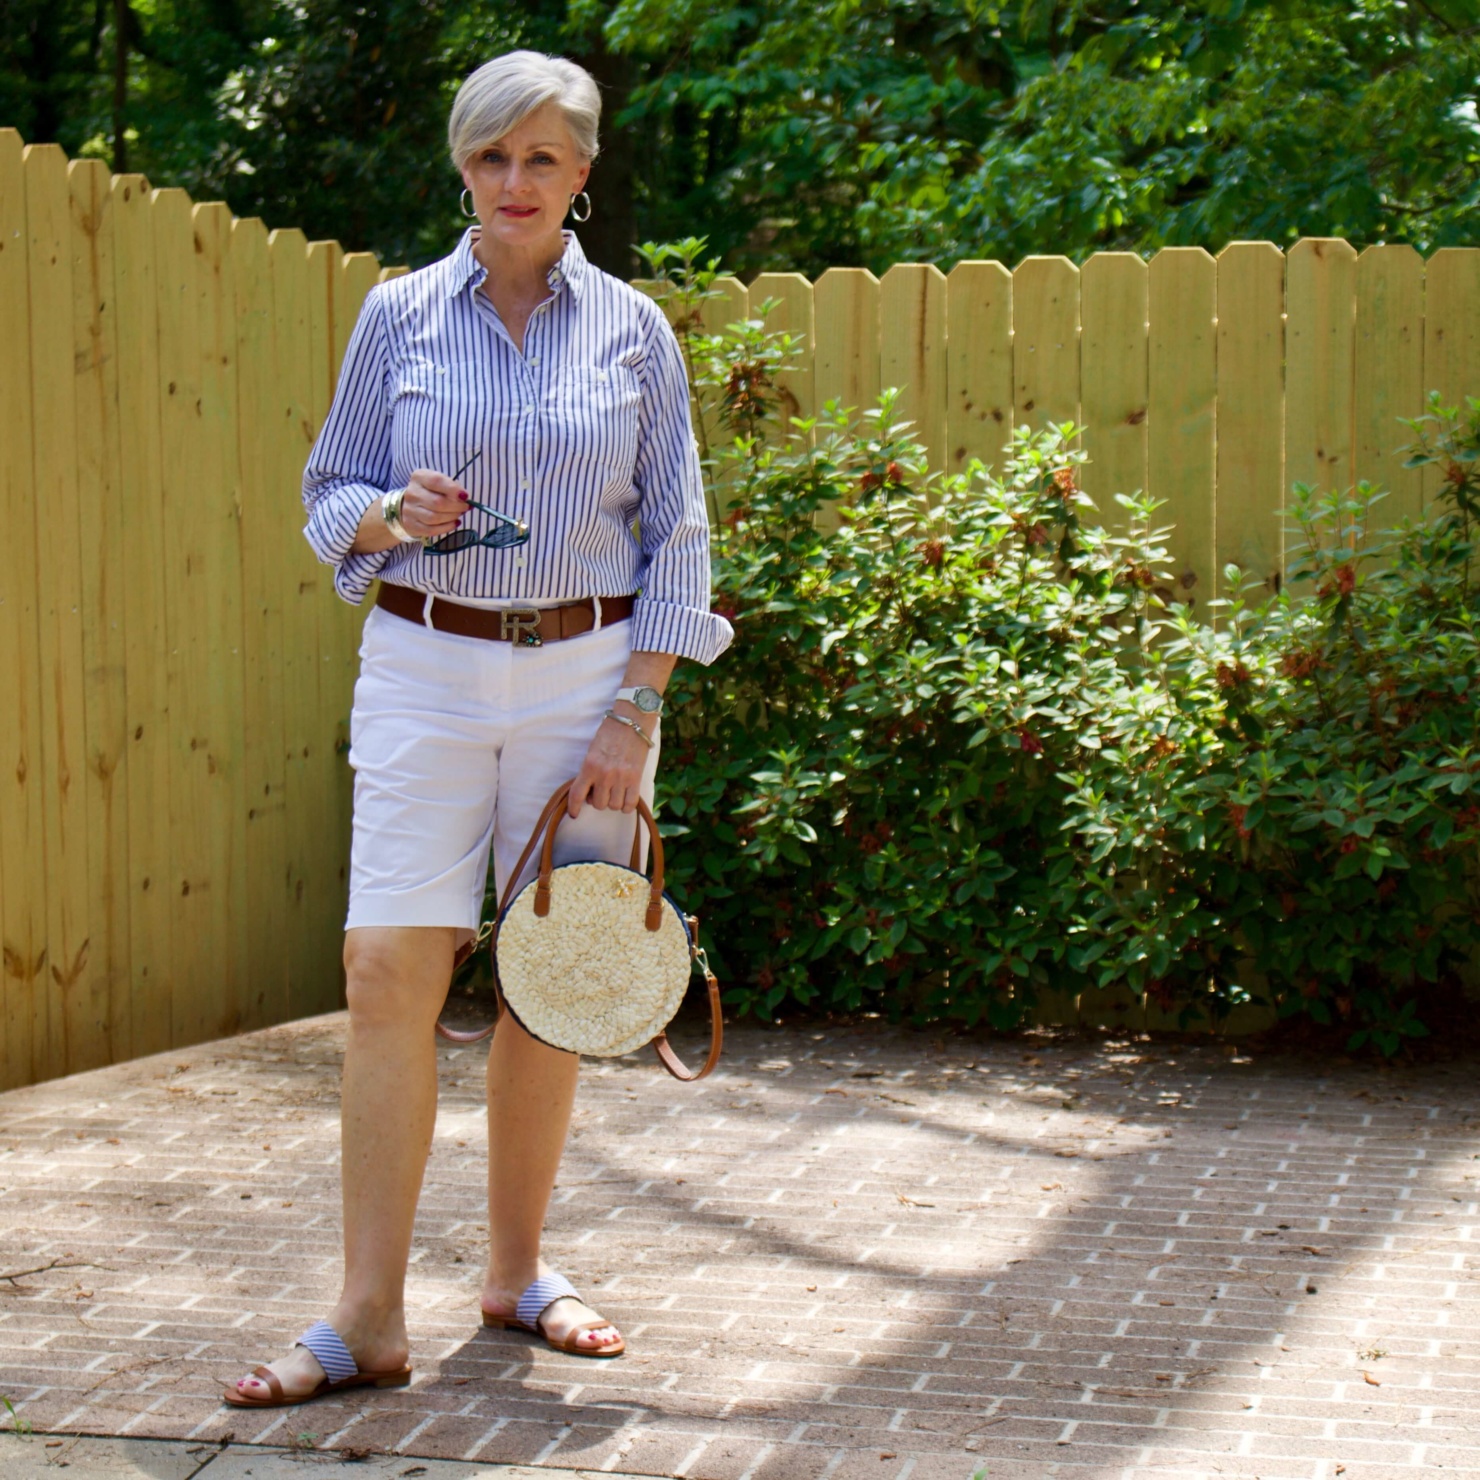 beth from Style at a Certain Age wears a striped shirt, white shorts, sandals, and rattan handbag